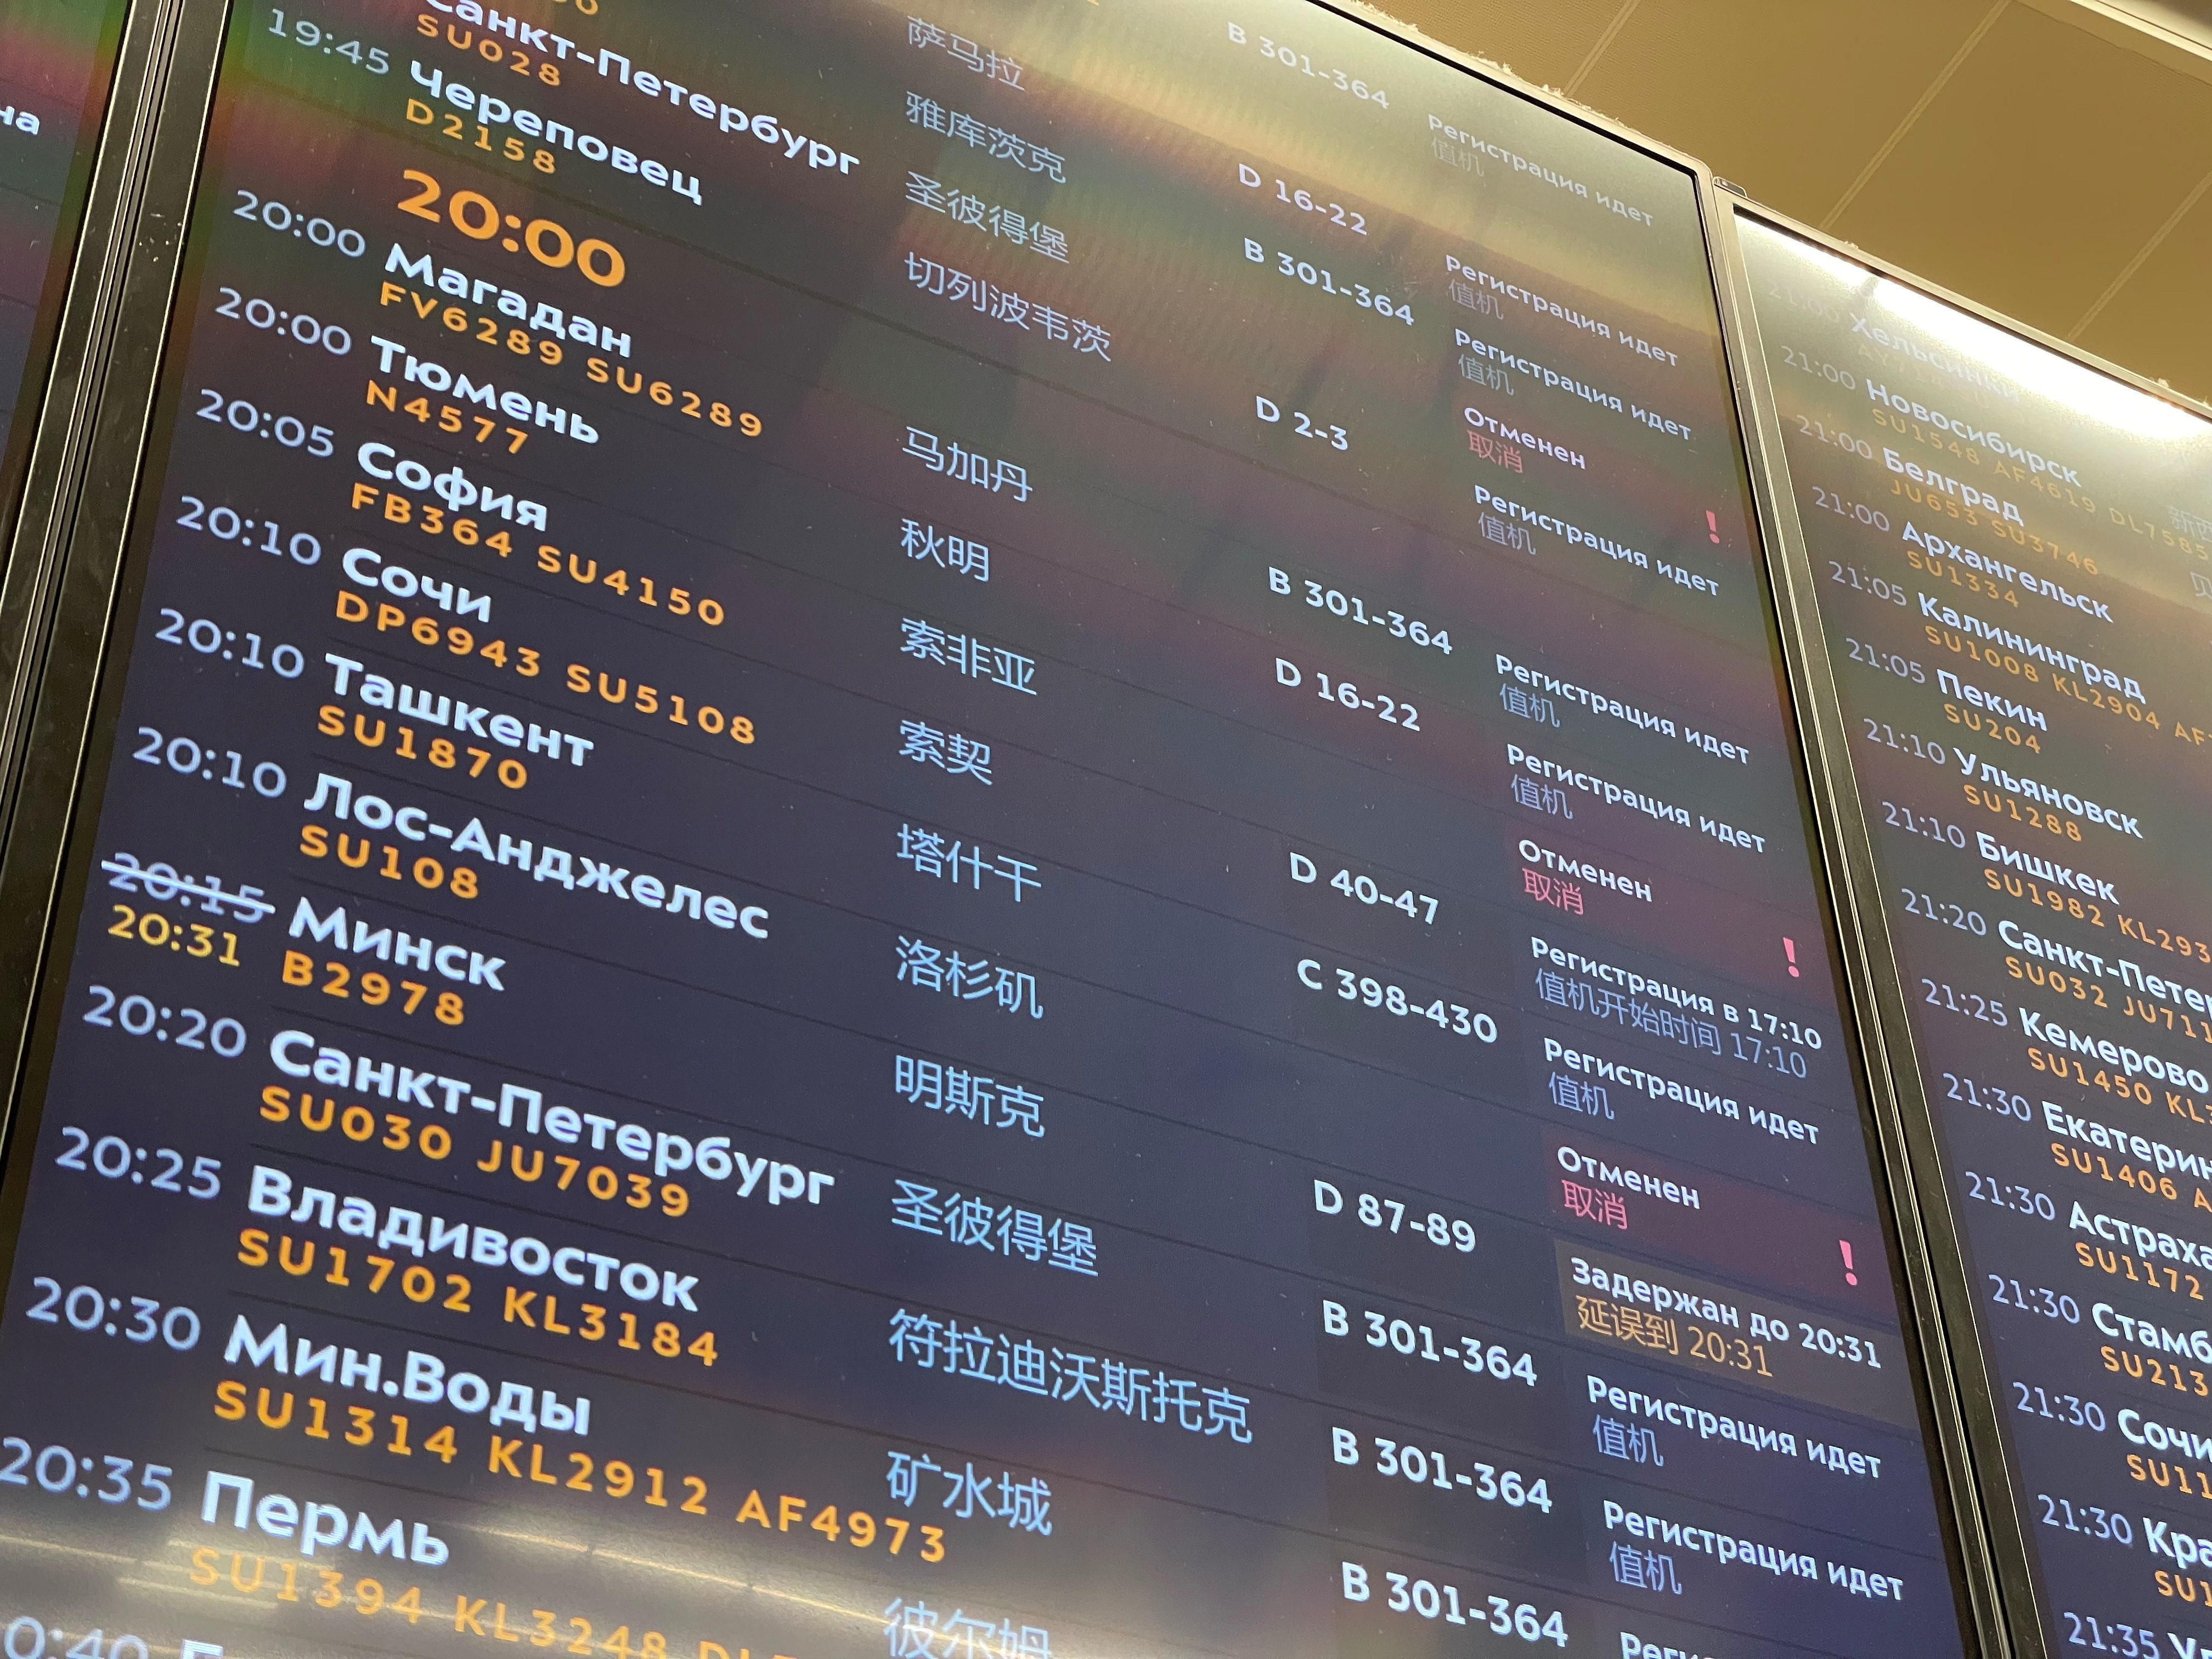 A view shows a departures board at Sheremetyevo airport in Moscow